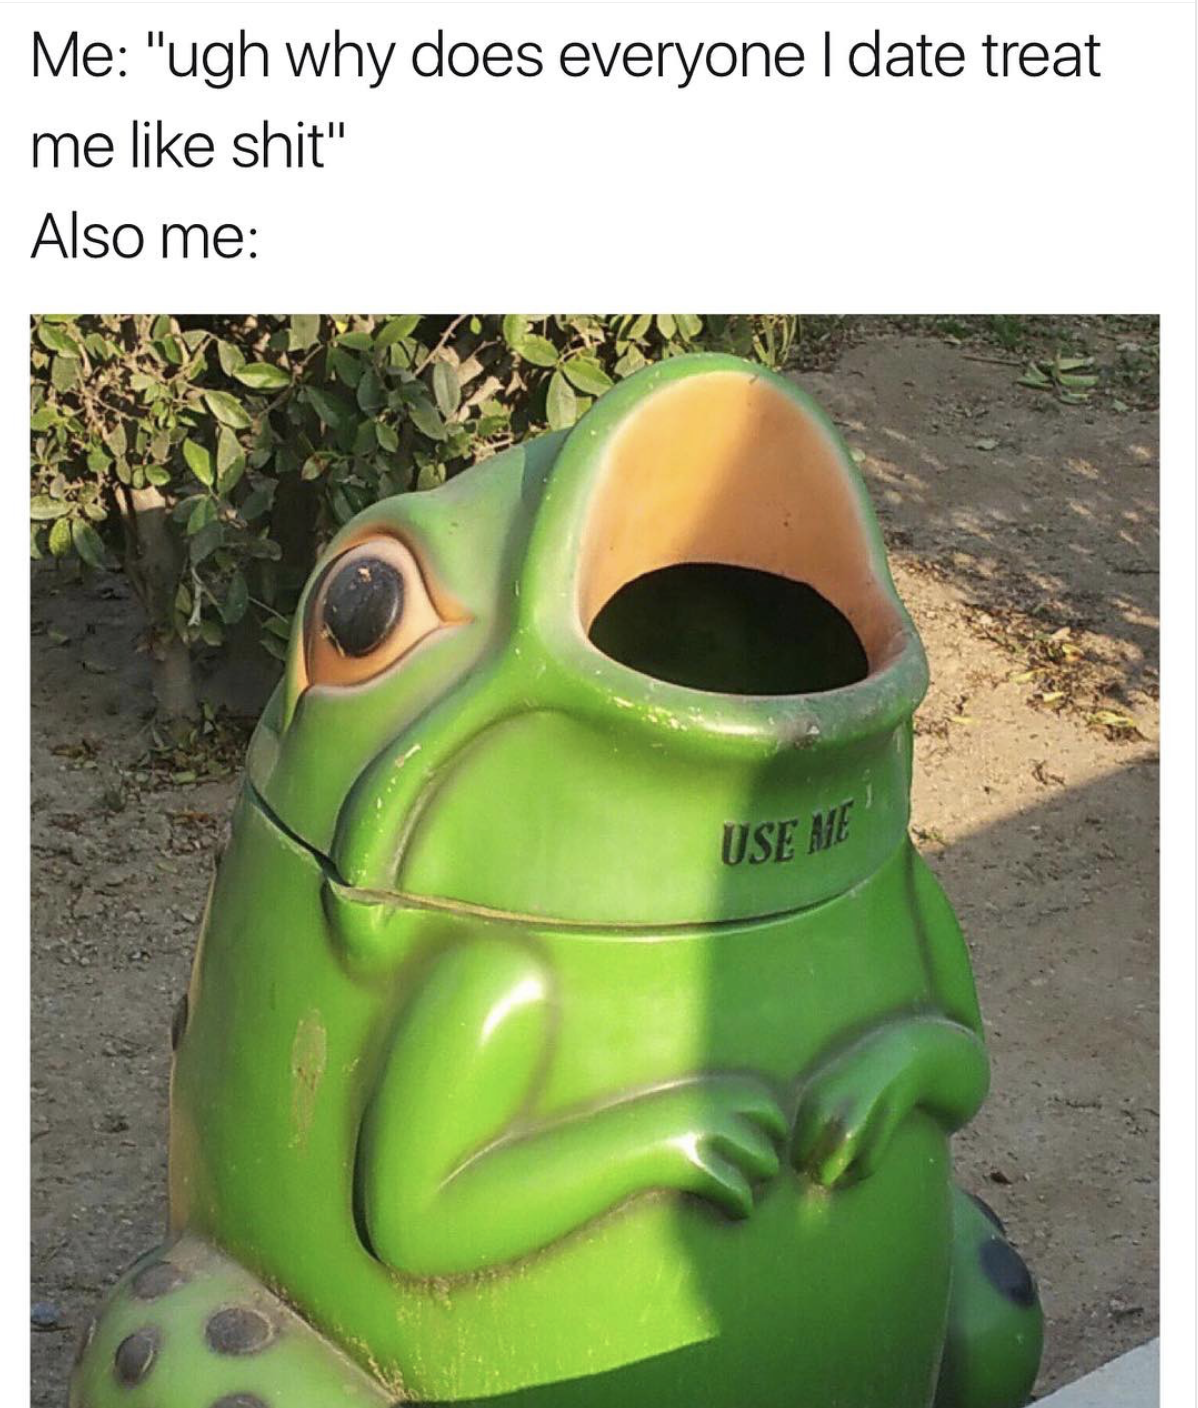 random good frog - Me "ugh why does everyone I date treat me shit" Also me Rven Use Me